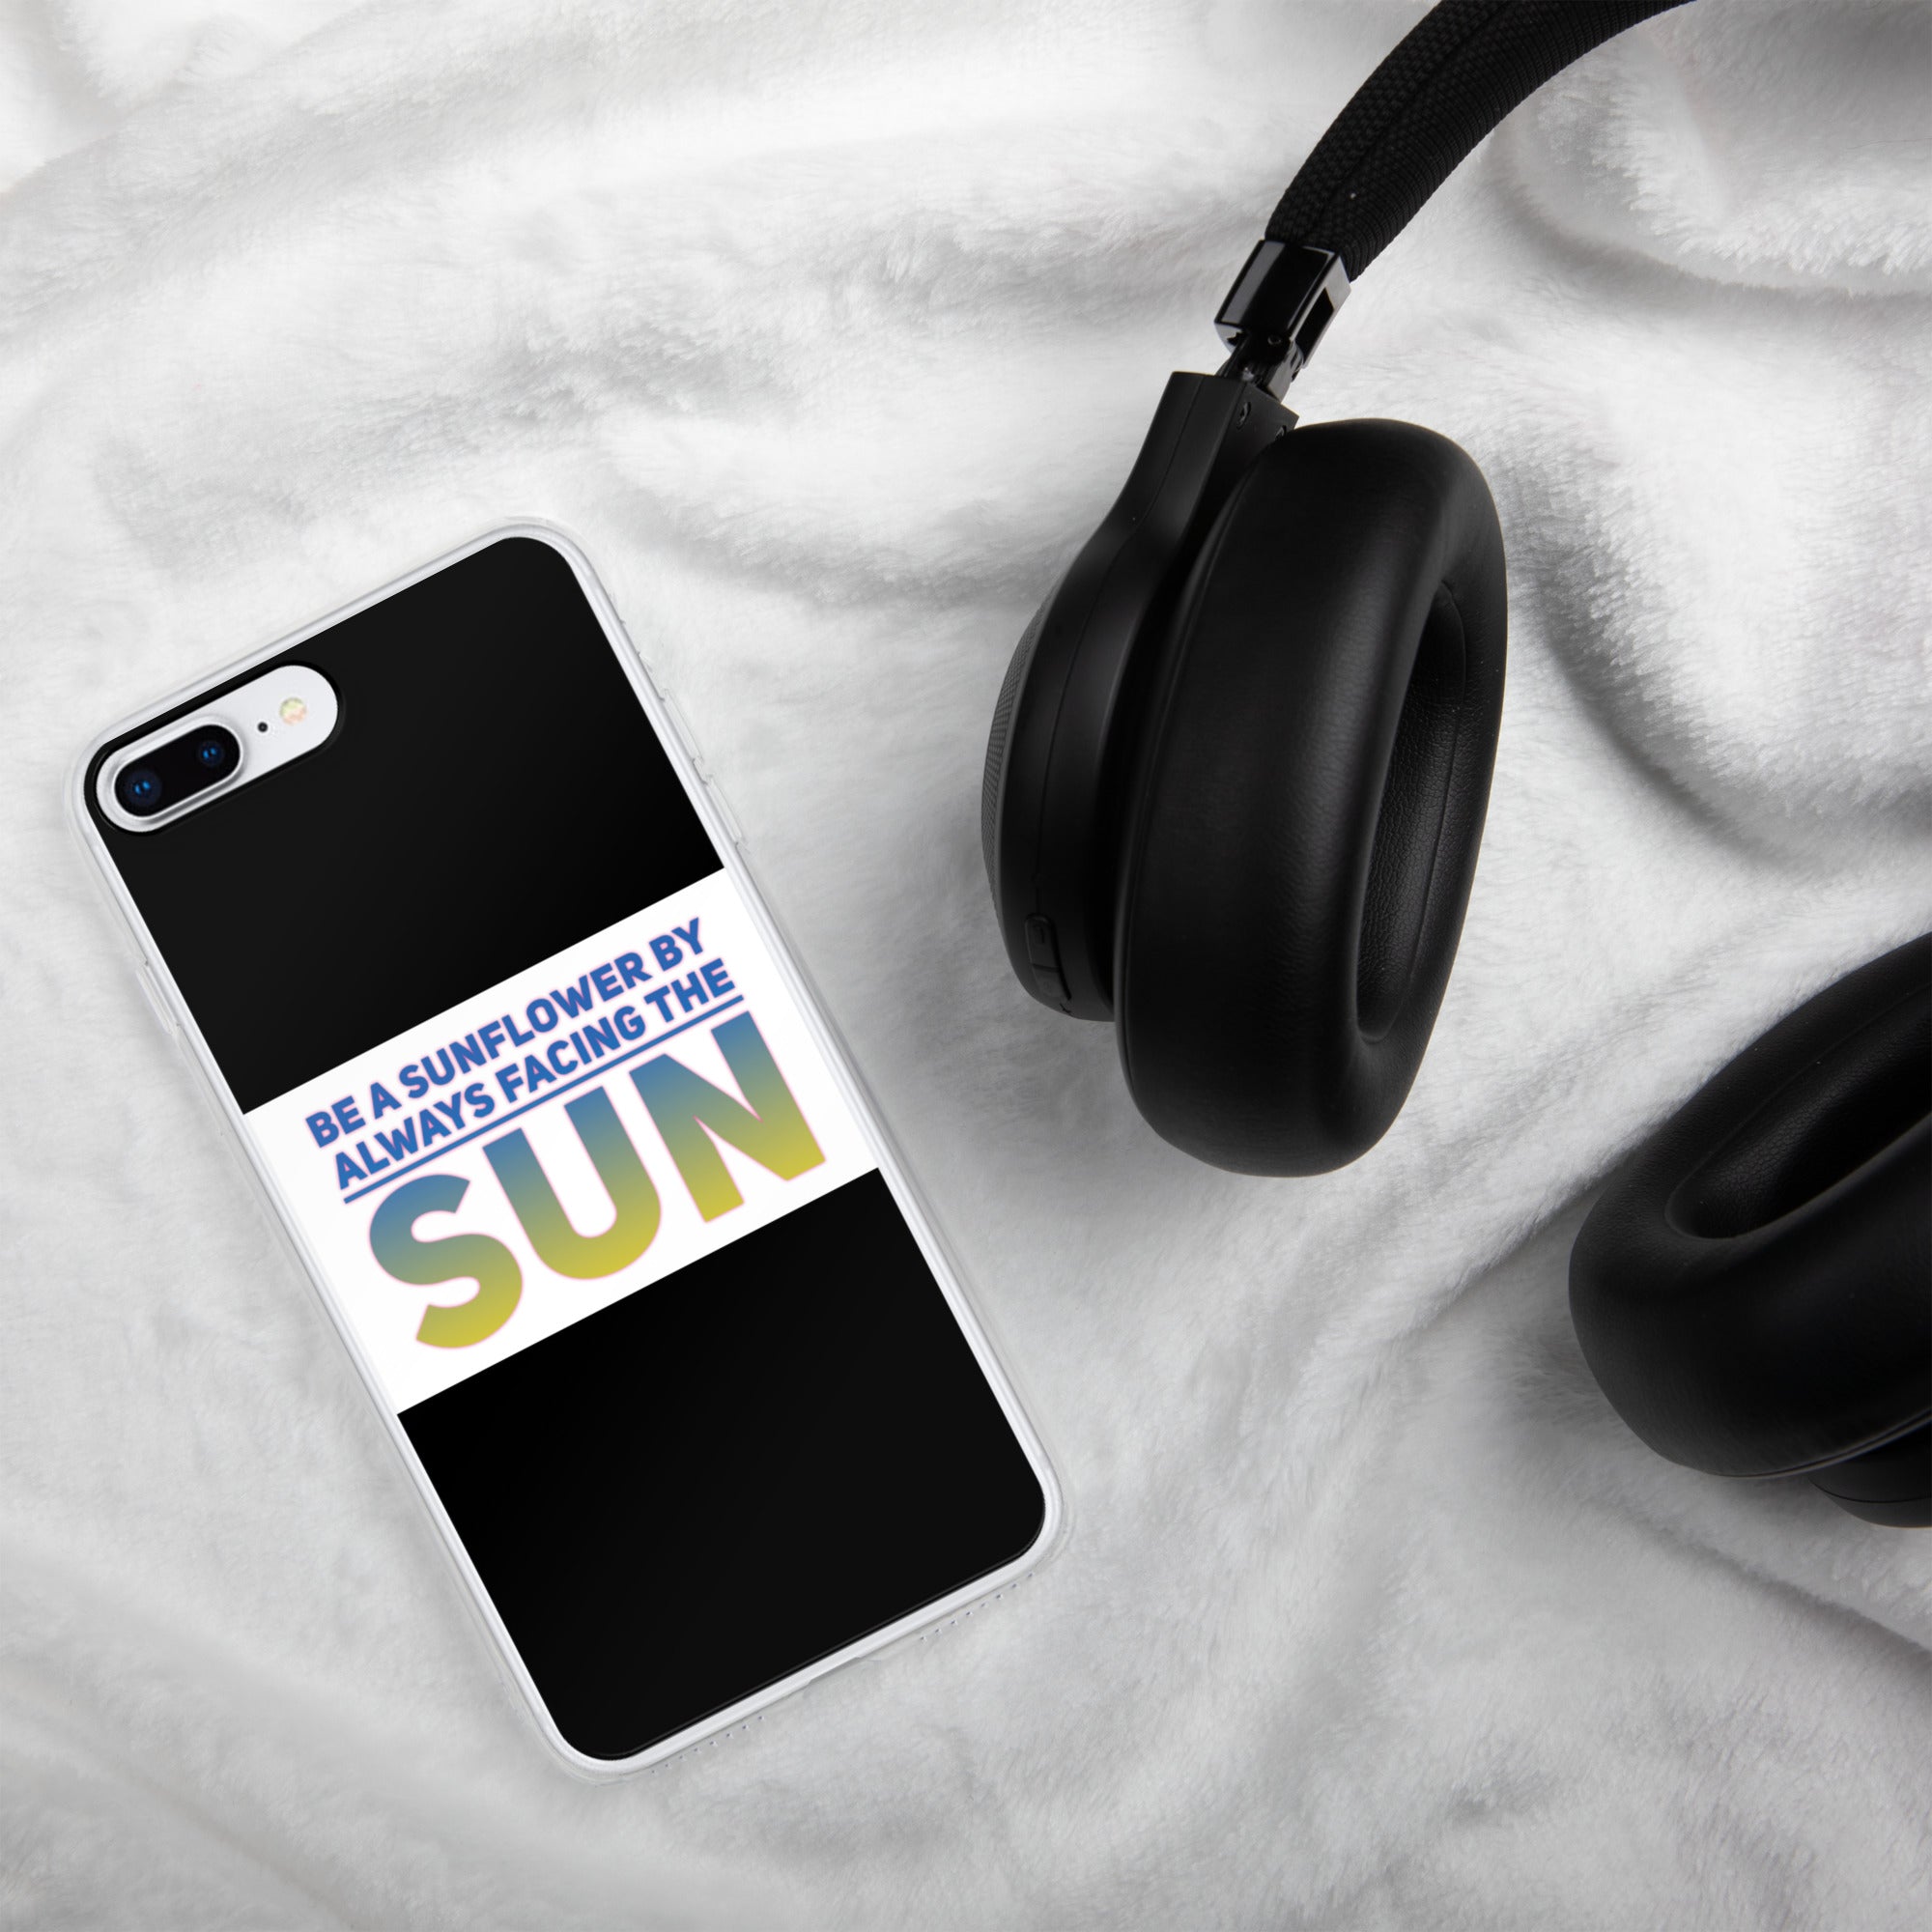 GloWell Designs - iPhone Case - Motivational Quote - Be a Sunflower - GloWell Designs